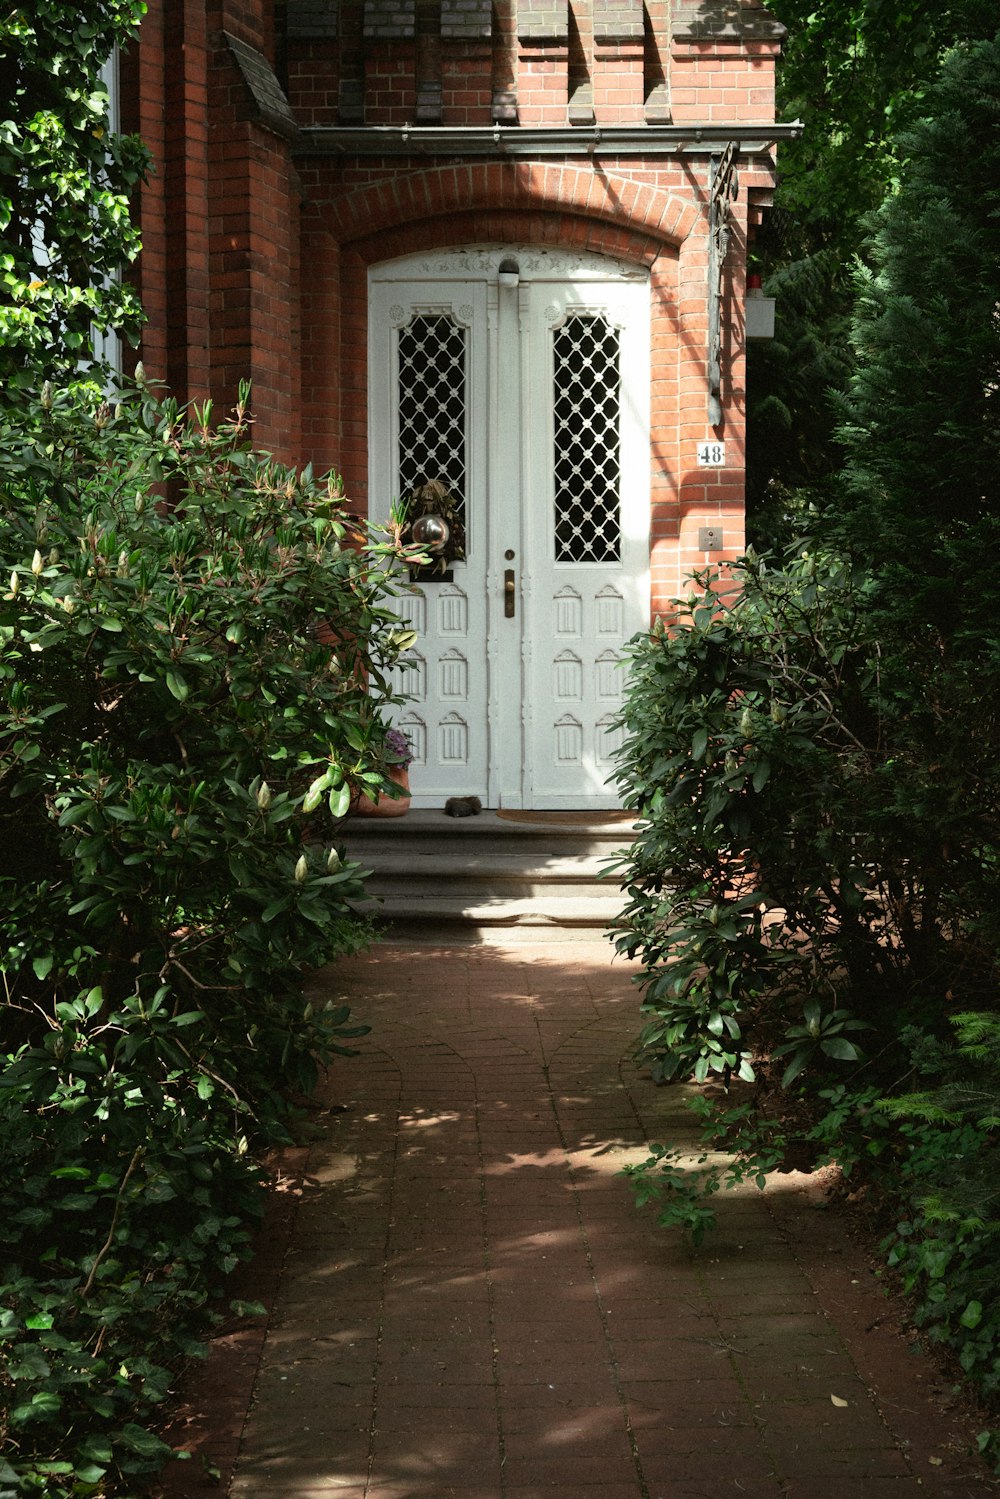 a brick house with a white door surrounded by greenery